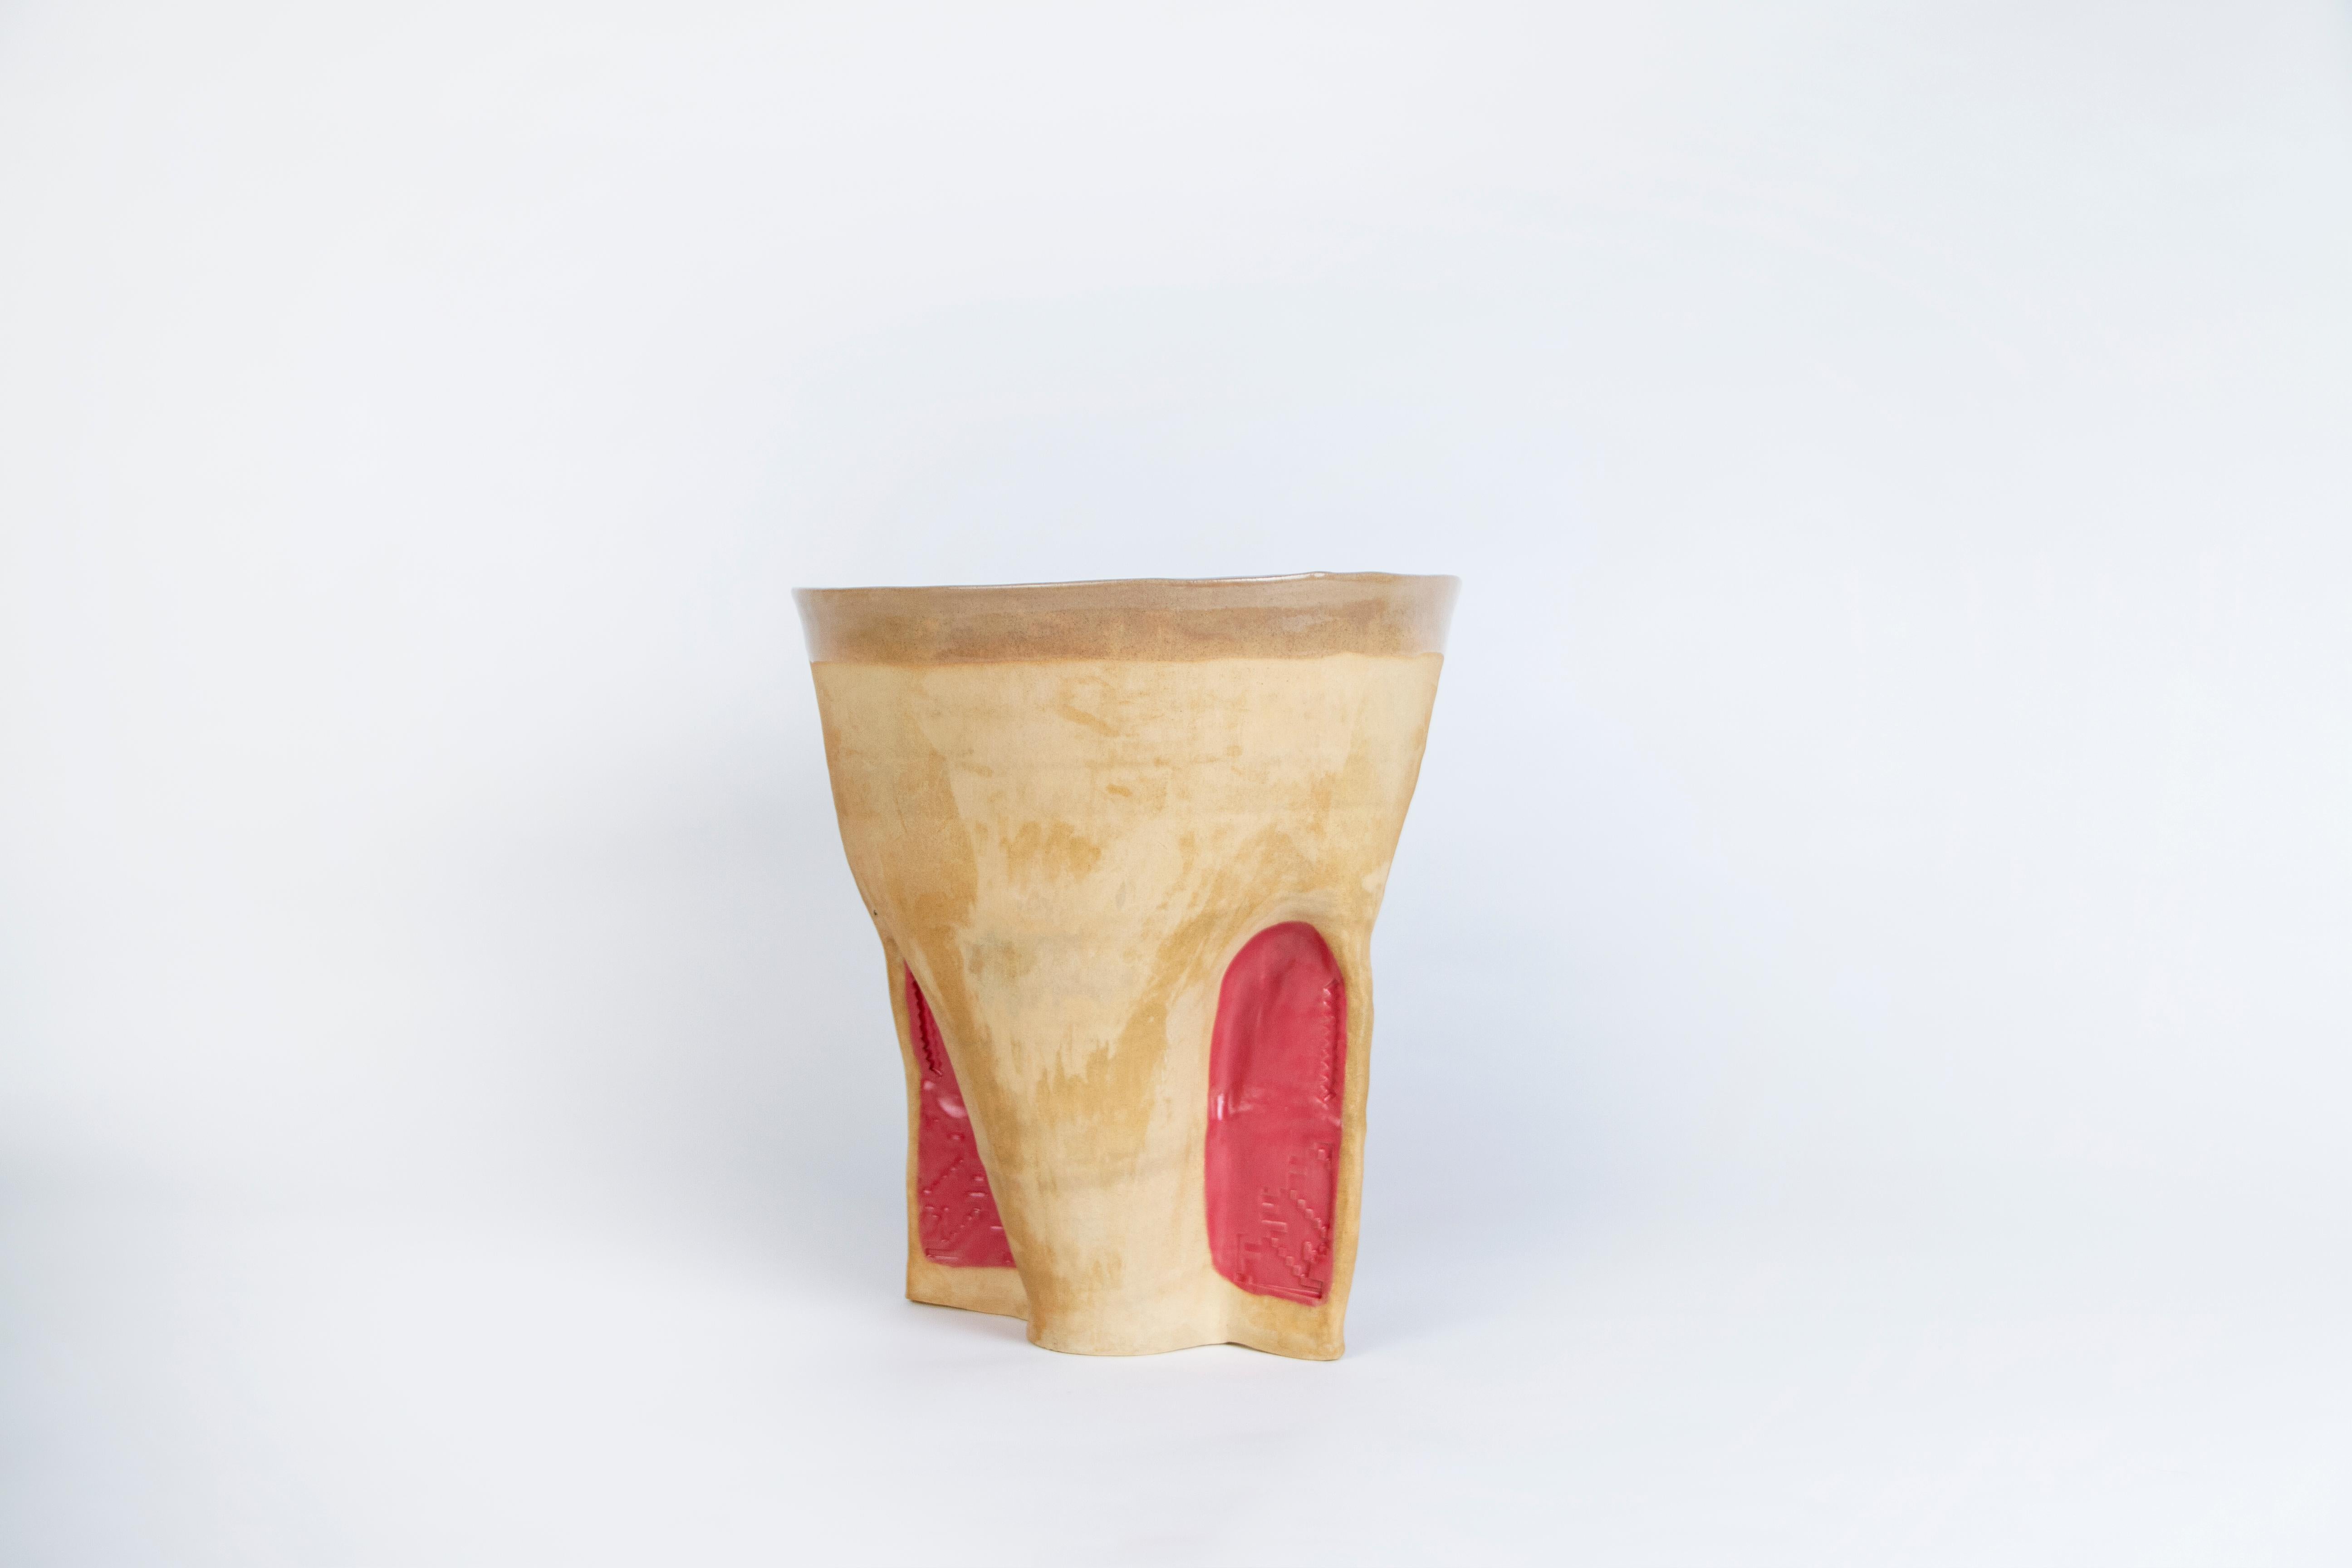 Corniche vase by Faissal El-Malak
Dimensions: 33 x 33 x 40 cm
Materials: ceramic

Faissal El-Malak is a Palestinian designer who was brought up between Montreal Canada and Doha Qatar. He trained as a fashion designer in Paris’ Atelier Chardon